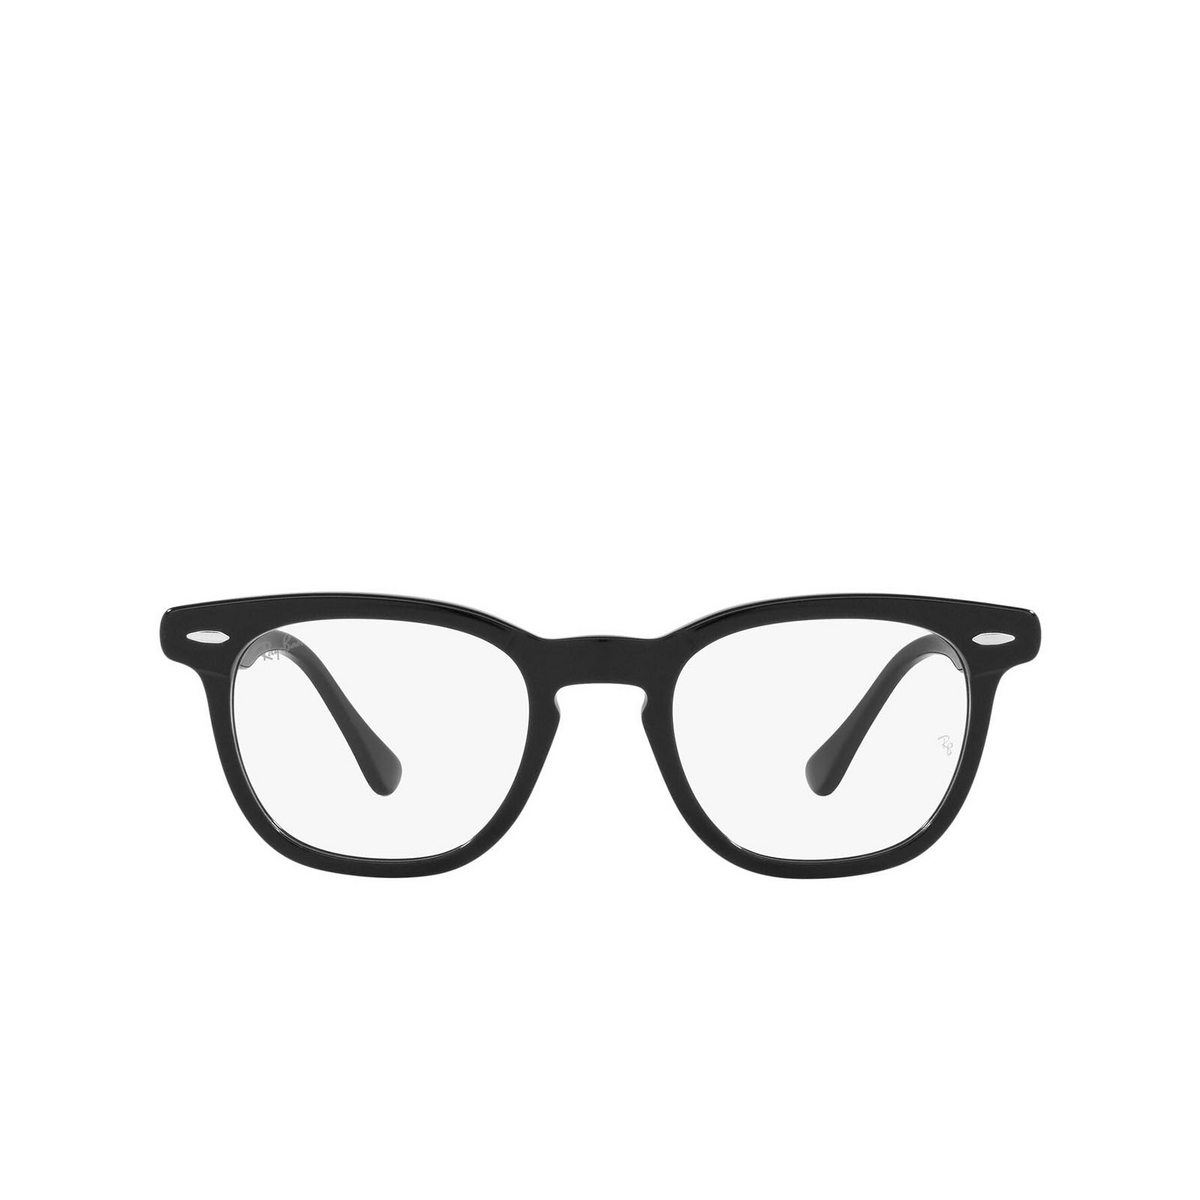 Ray-Ban® Square Eyeglasses: Hawkeye RX5398 color Black 2000 - front view.